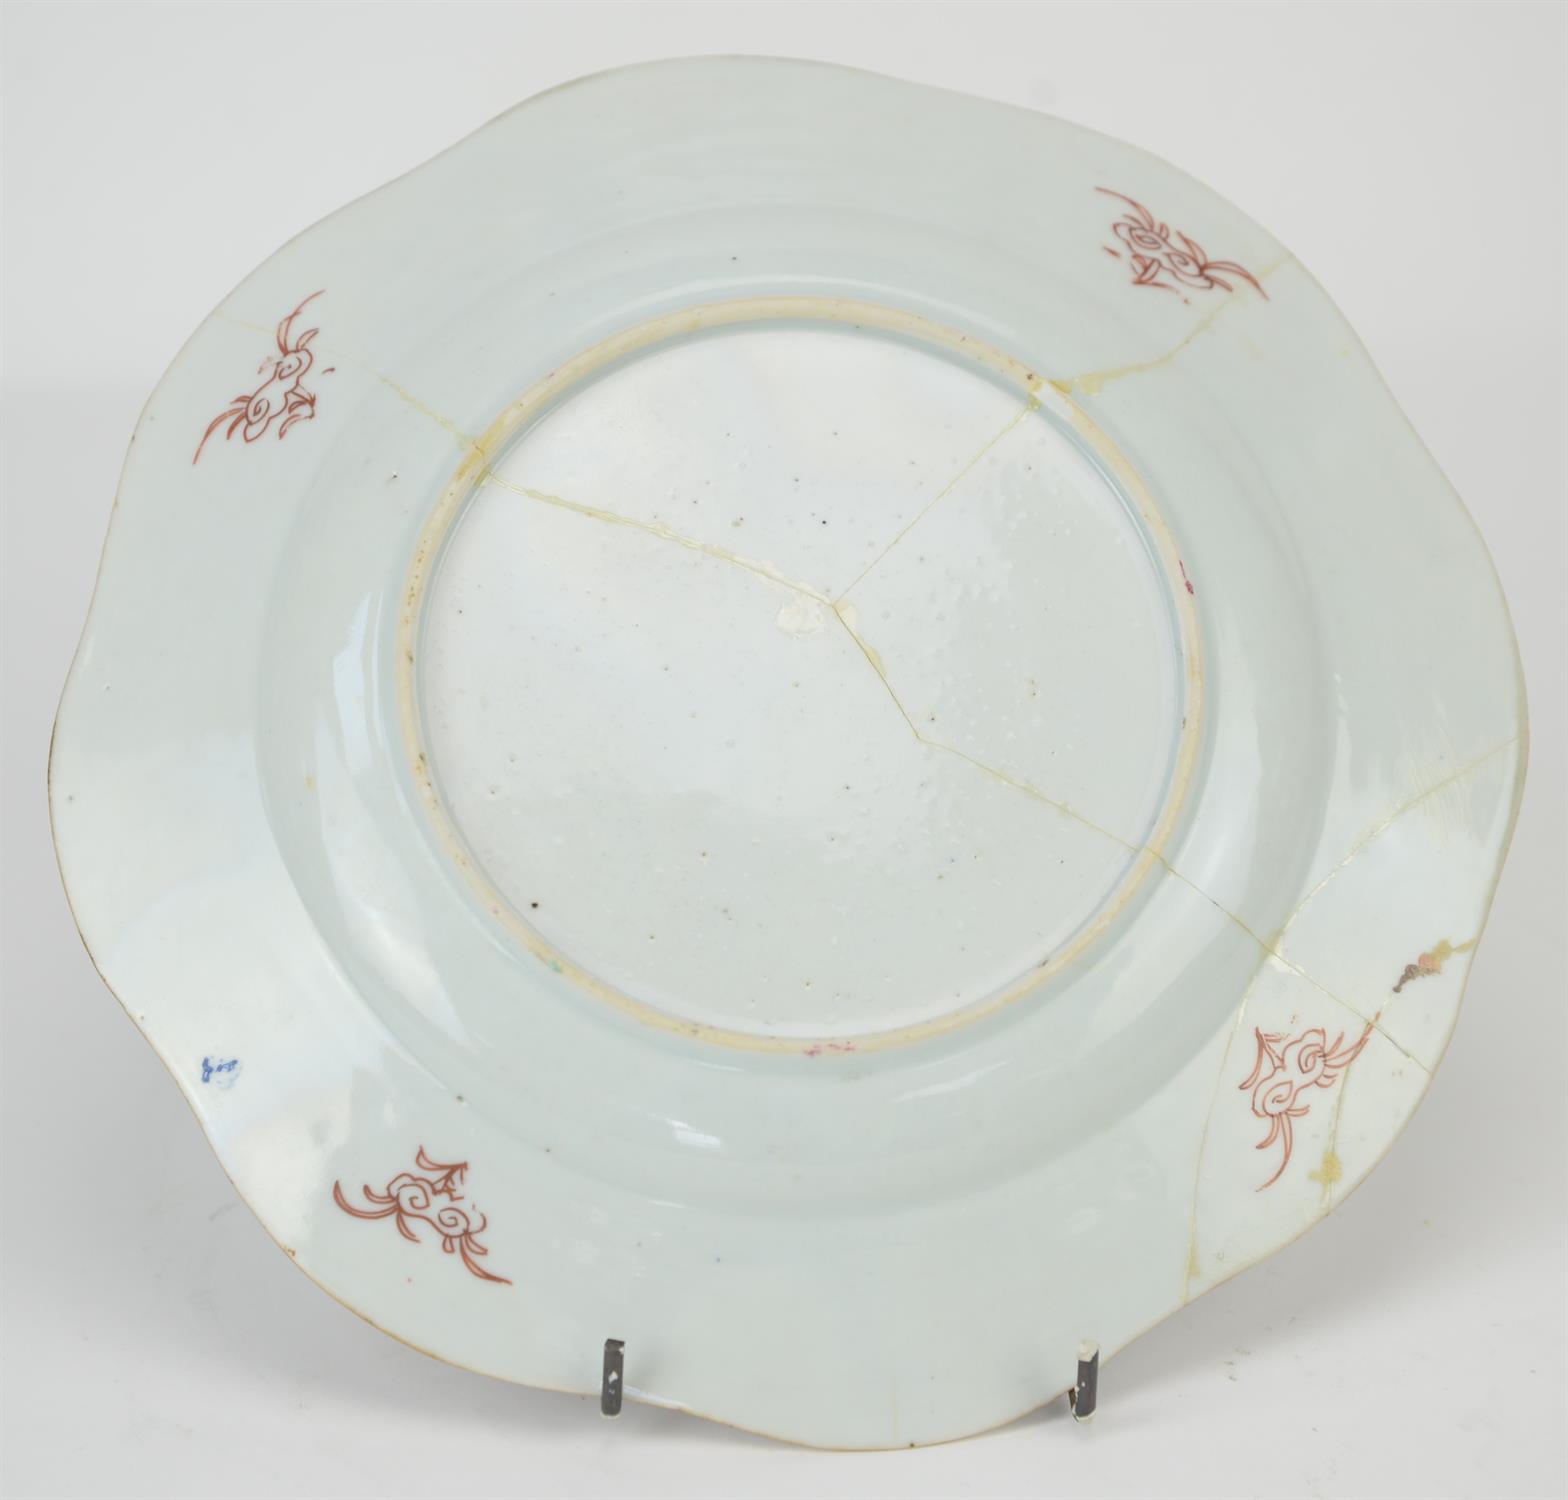 Eight famille rose dishes; each one decorated with floral designs and about 22.5 cm diameter, - Image 22 of 28